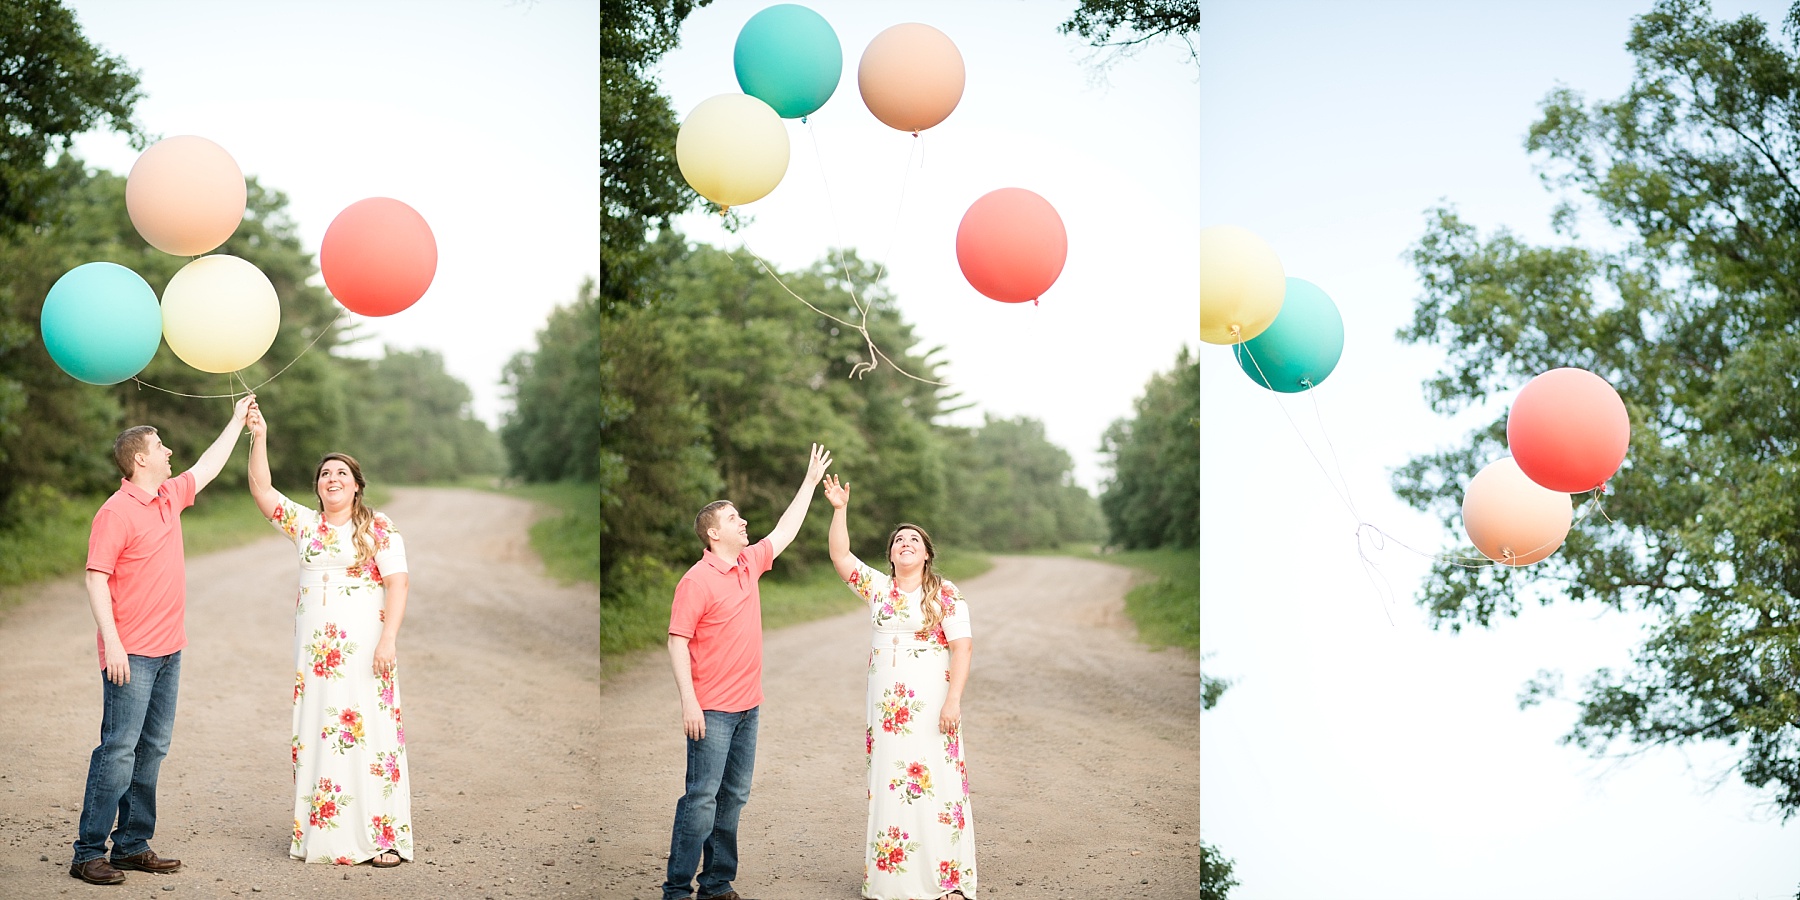 A vintage looking Schwinn with a bike basket & big round balloons were the cutest accessories for Jessica & Bradley's Eau Claire engagement photos.